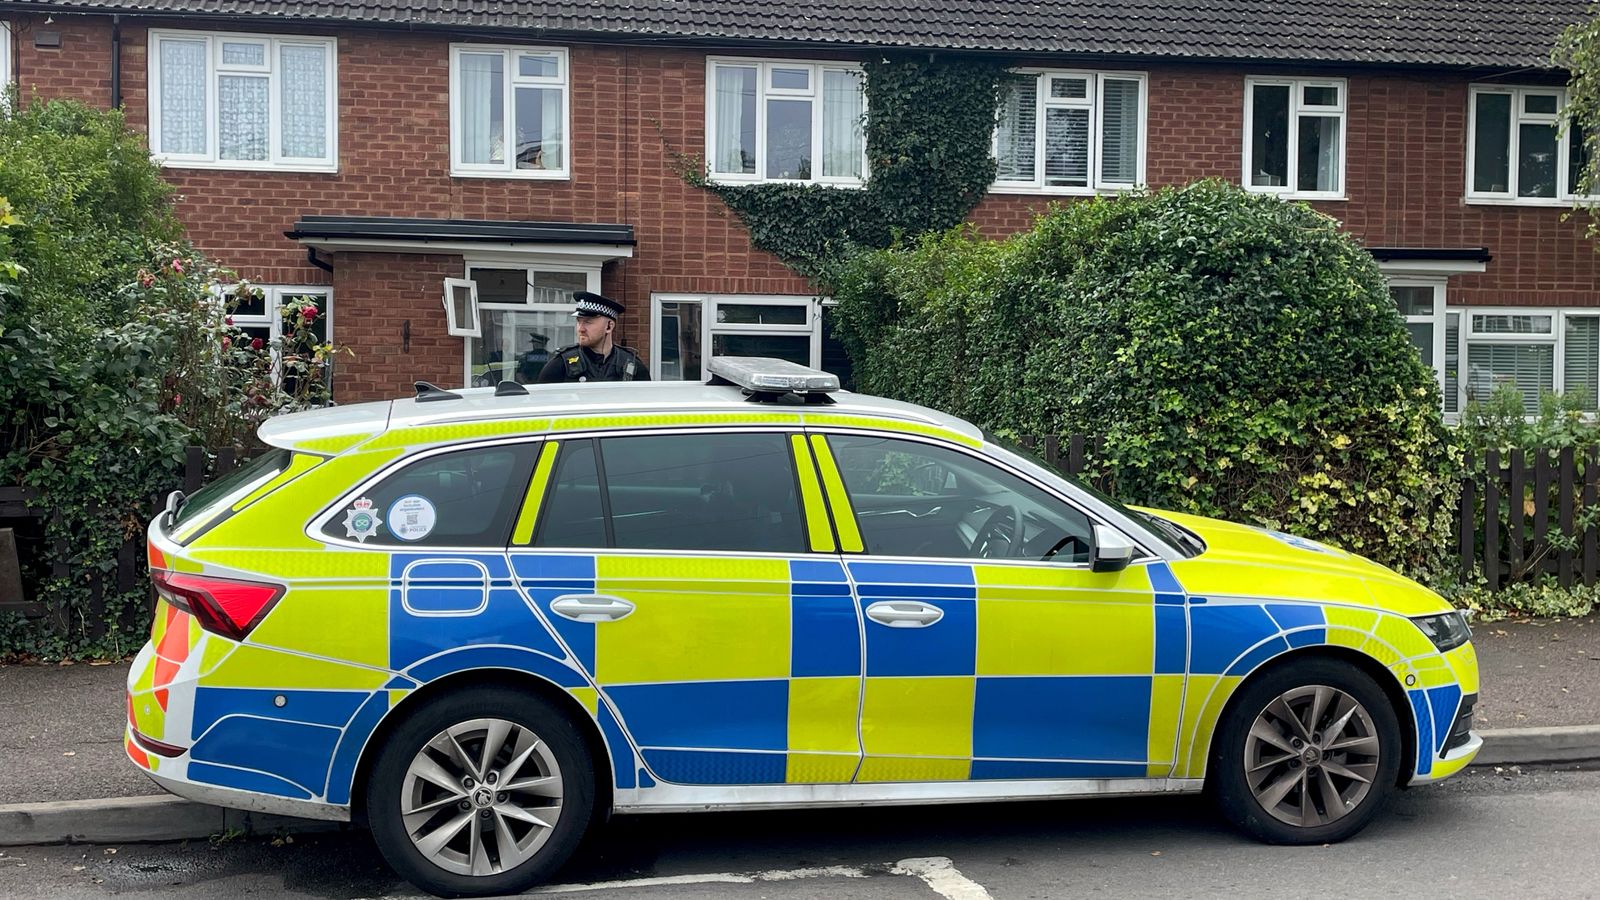 Man dies after being attacked by two dogs in Staffordshire